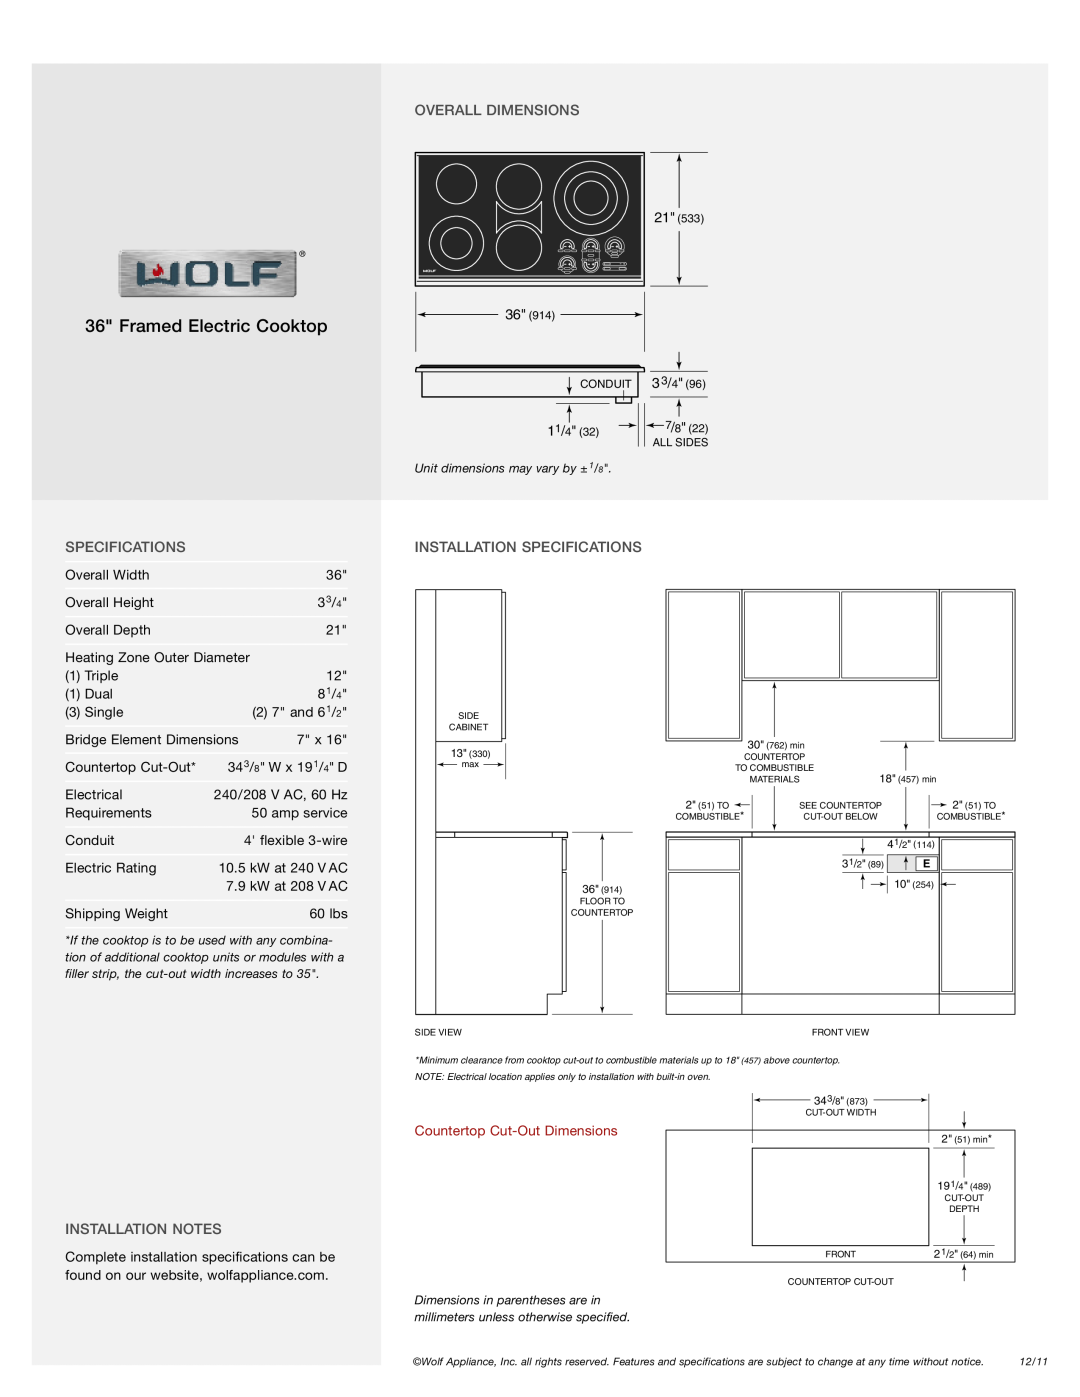 Wolf Appliance Company CT36E/S manual Overall Dimensions, Installation Specifications, Installation Notes 